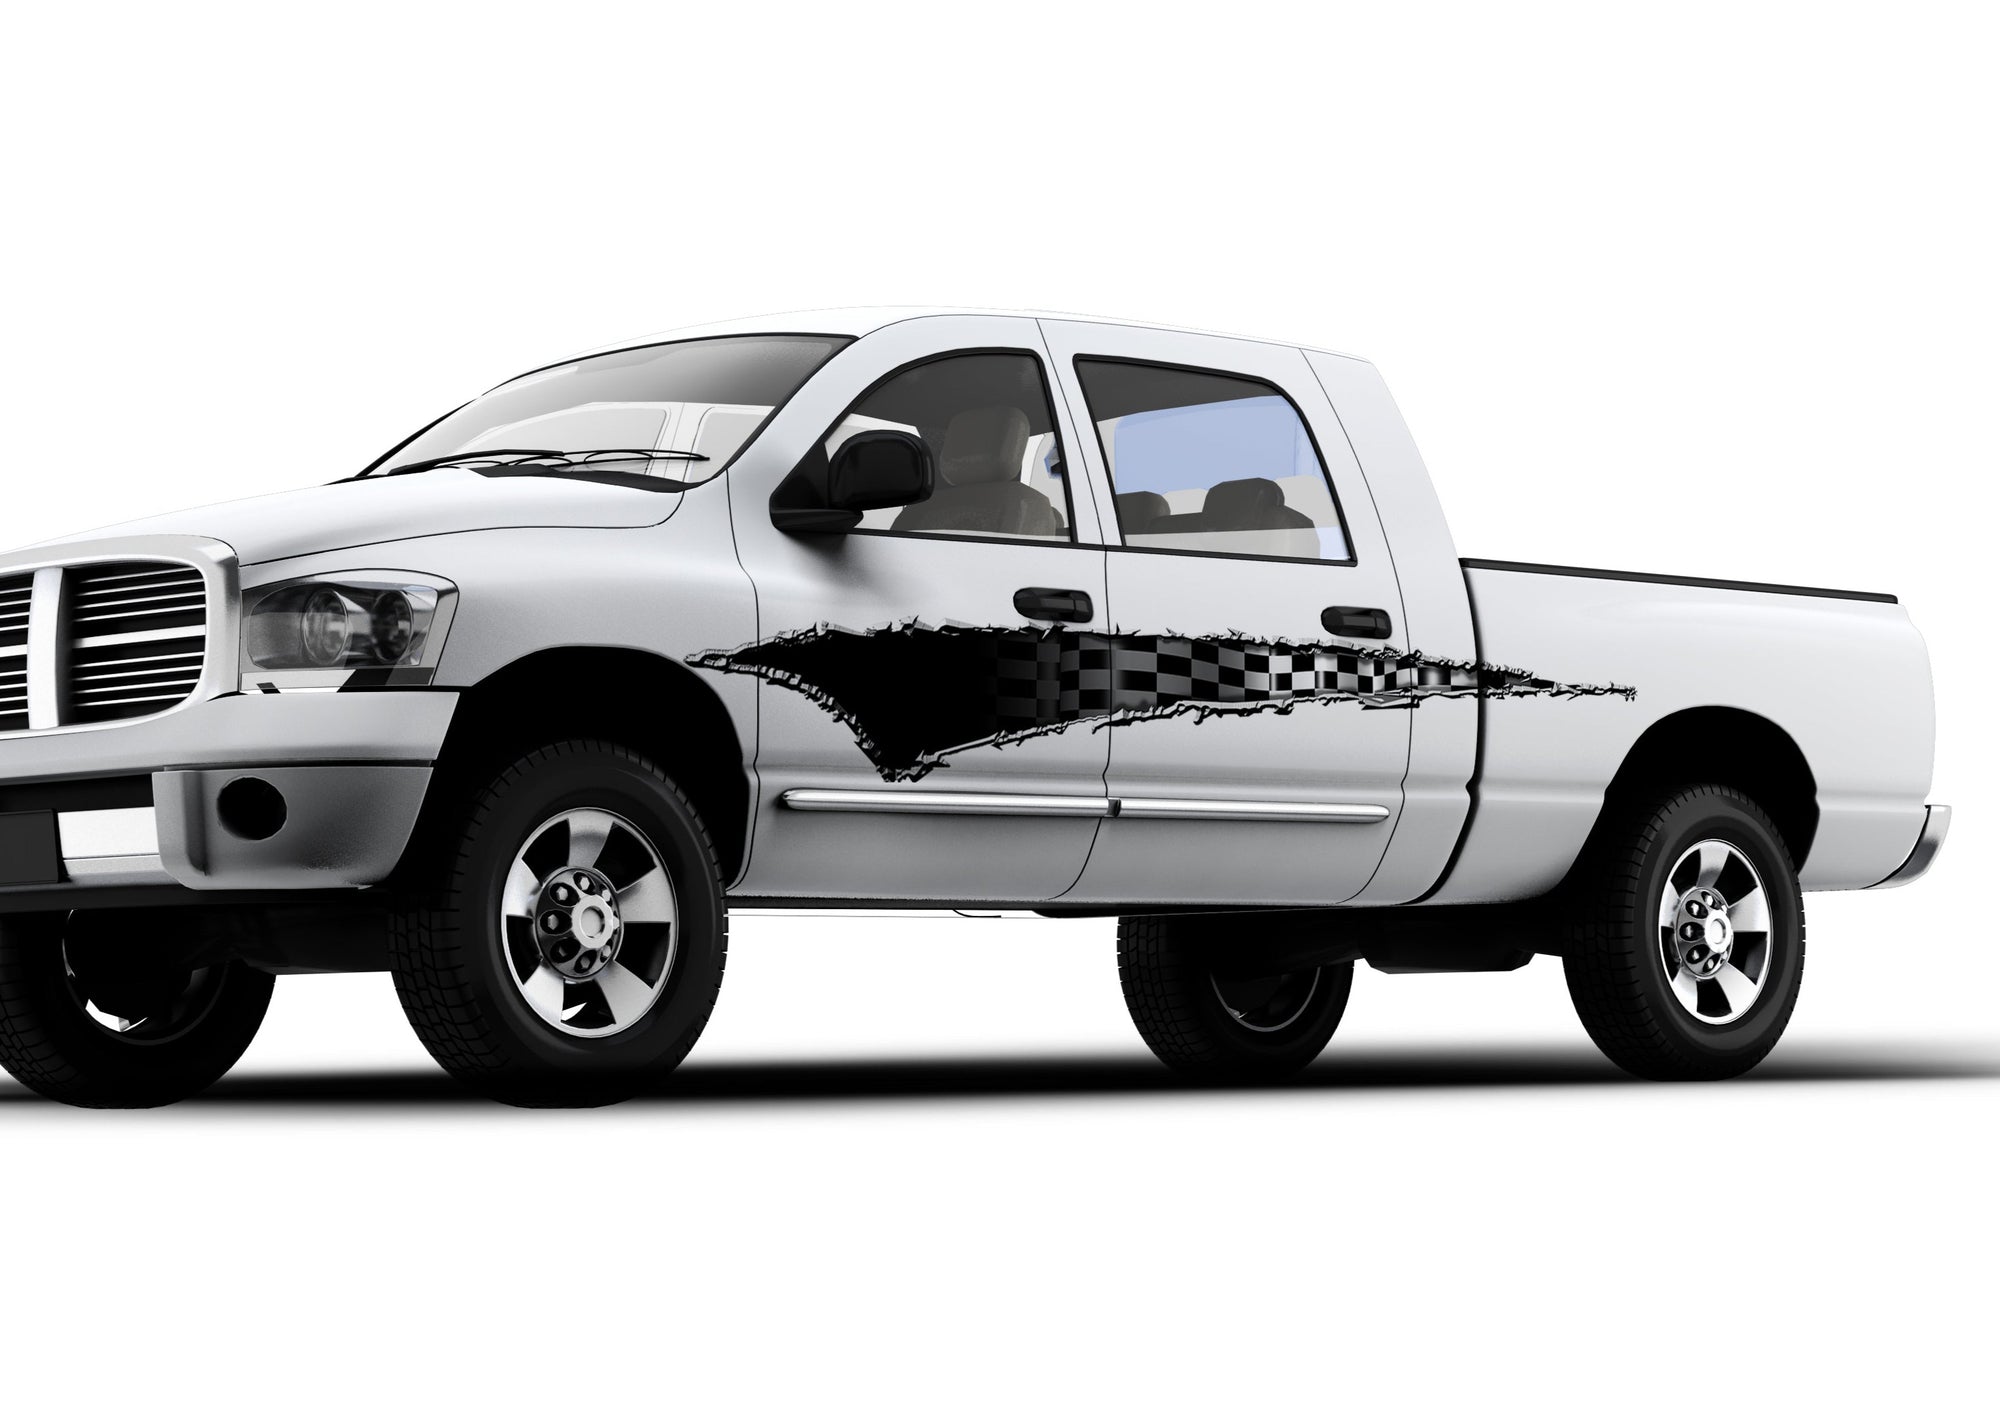 scratch checkers tear vinyl decal on the side of white pickup truck